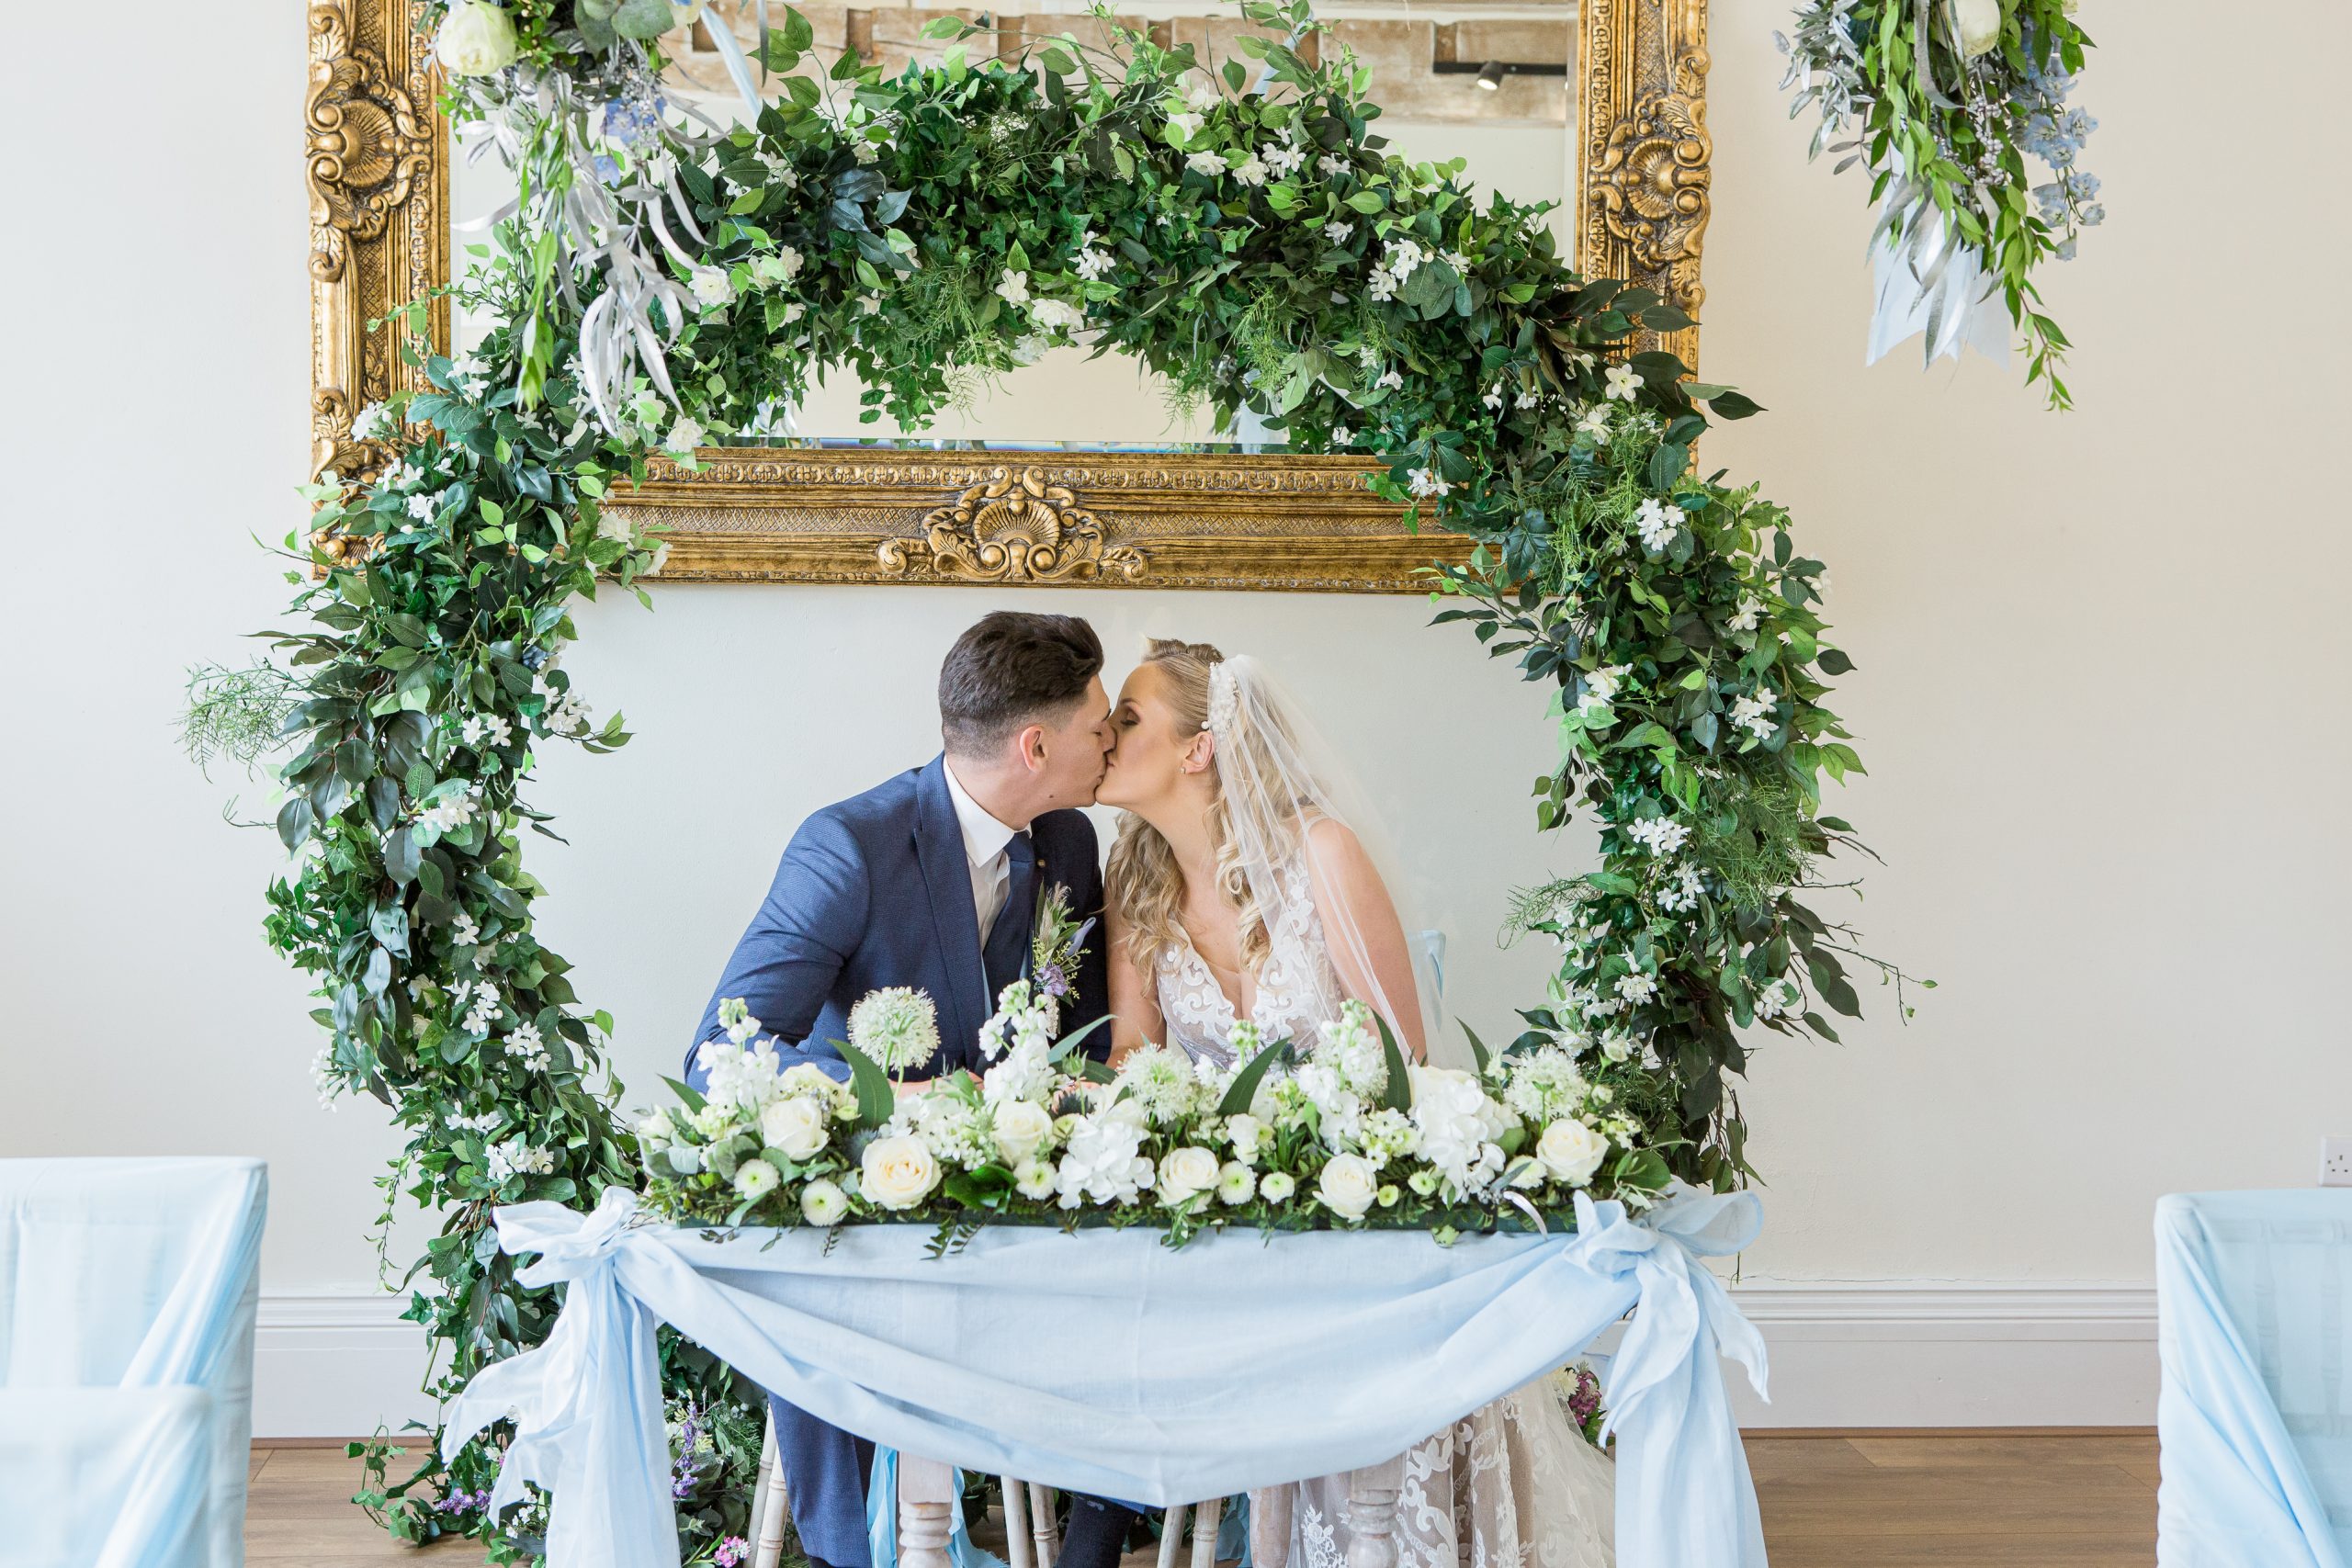 floral arch, flower arch, wedding arch hire, wedding ideas, wedding decorations, wedding decor hire, wedding decoration ideas, ceremony hire, flower wall hire